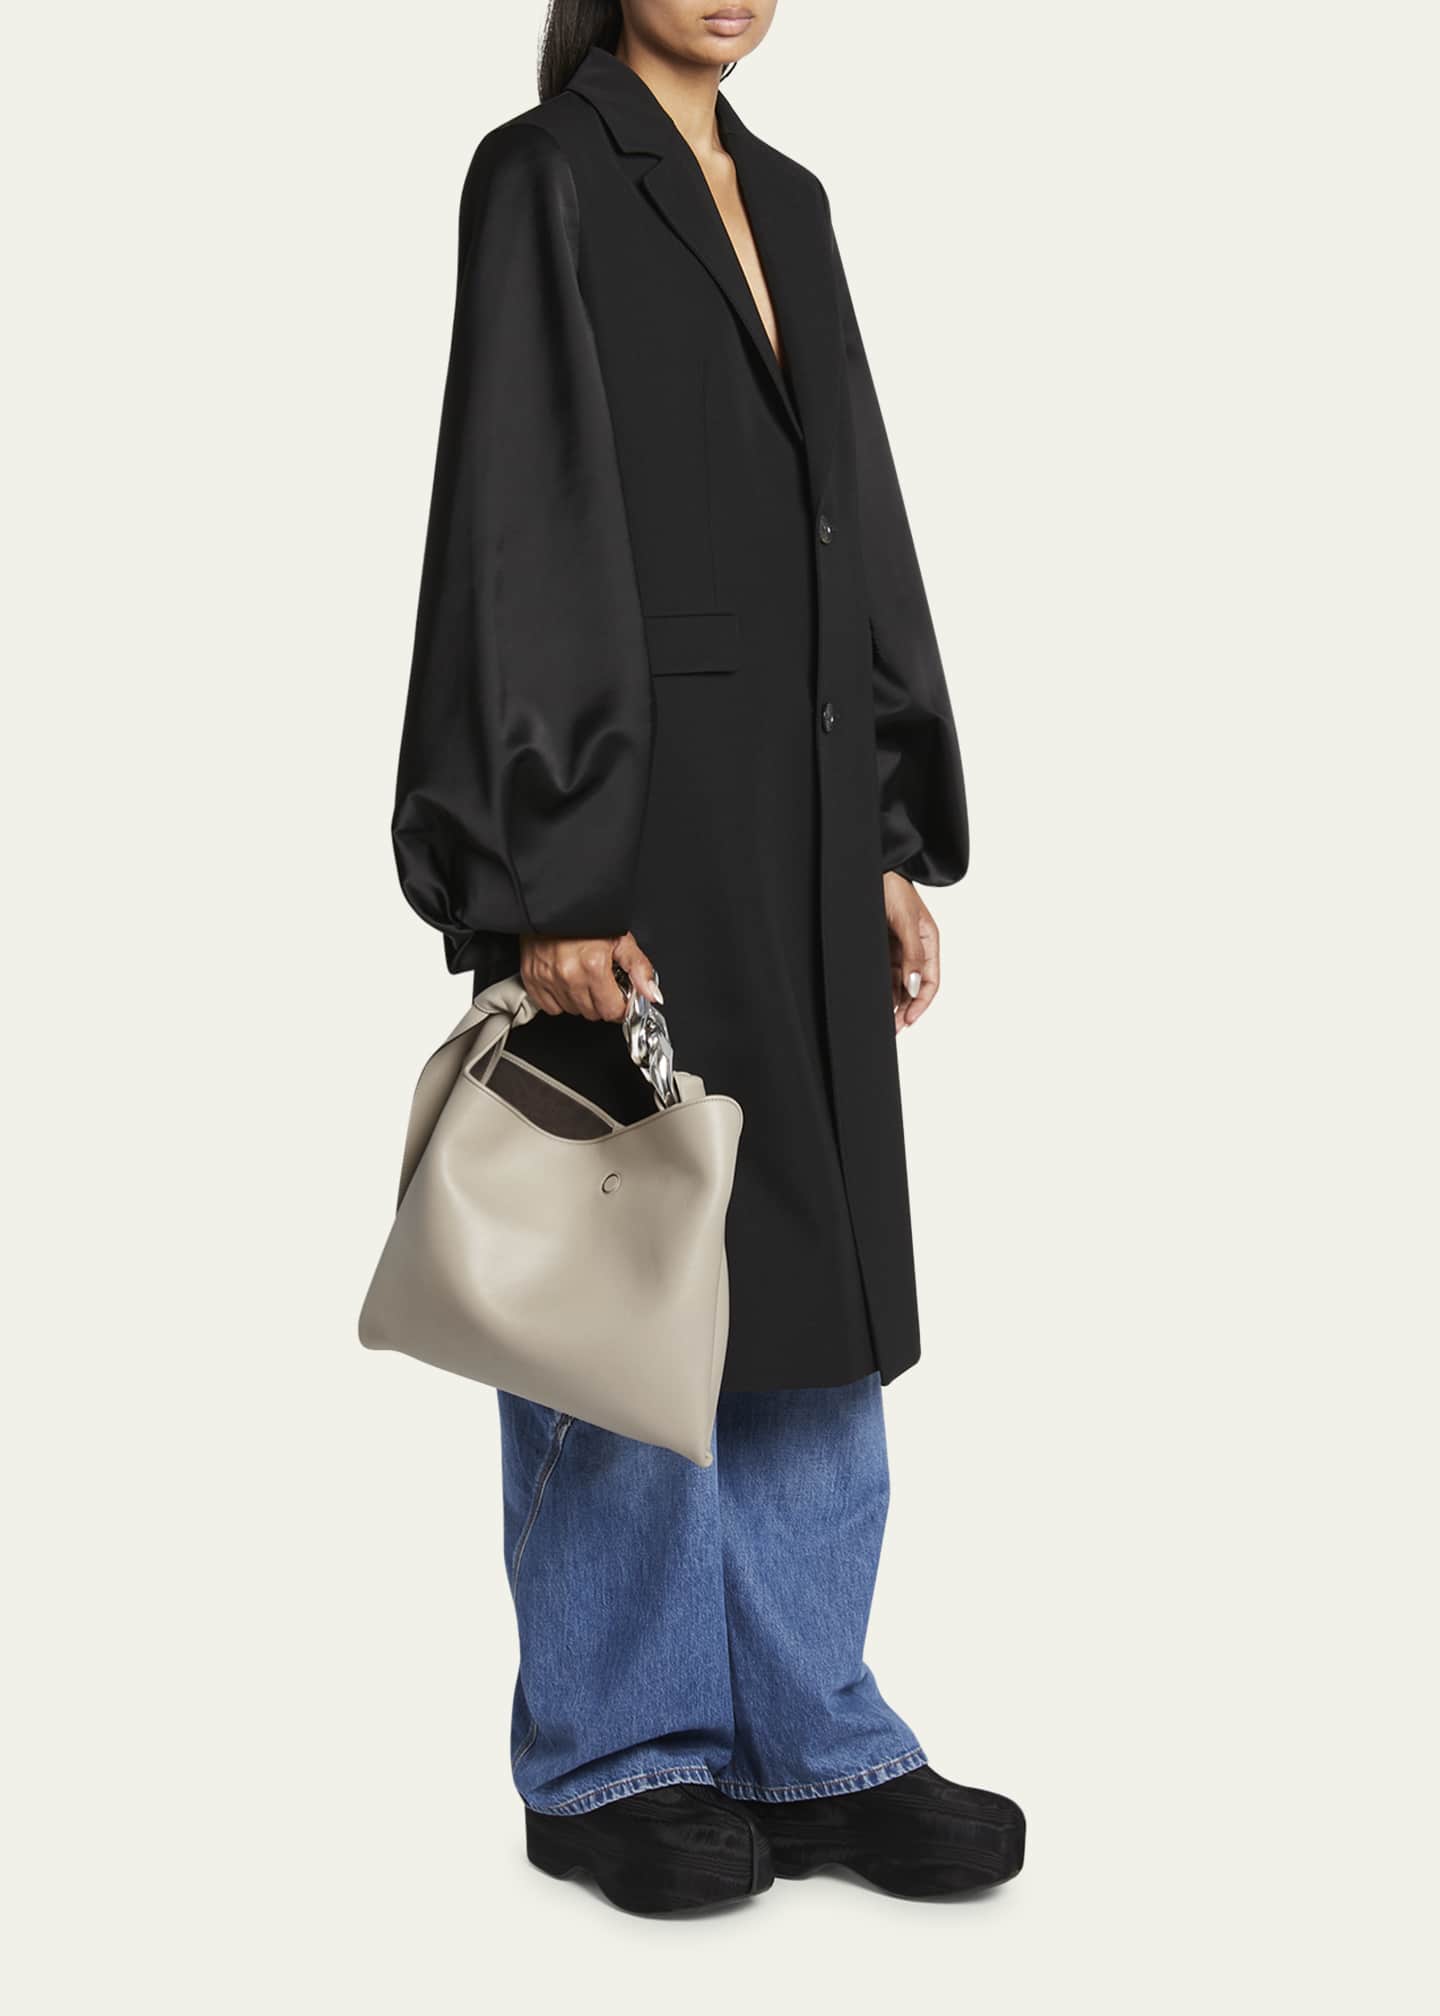 JW Anderson Small Chain Leather Top-Handle Bag - Bergdorf Goodman